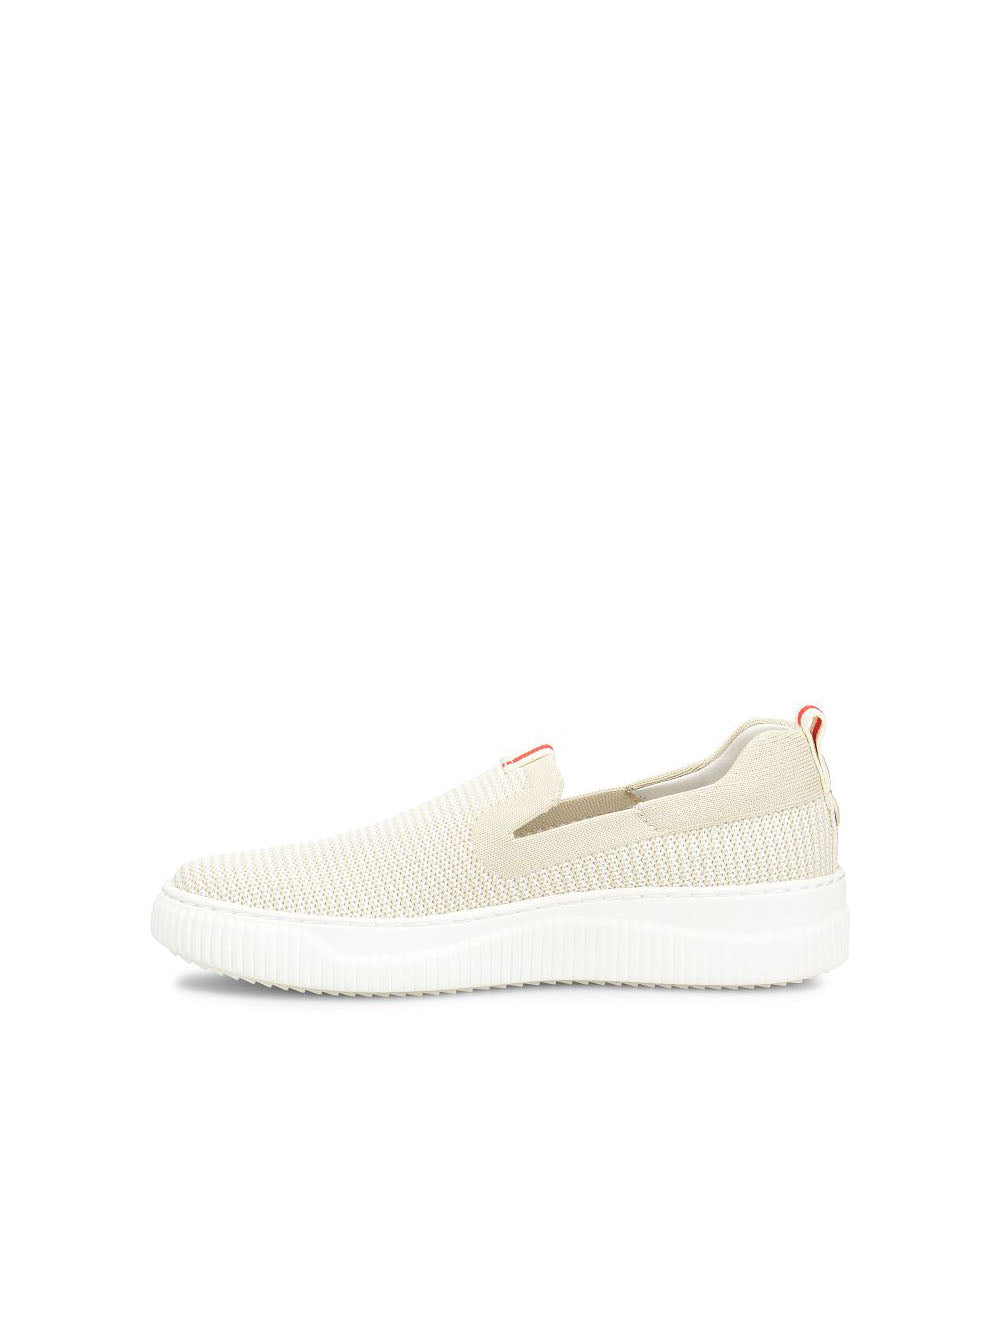 sofft shoes frayda mesh slip on sneakers in tofu beige tan with red detail